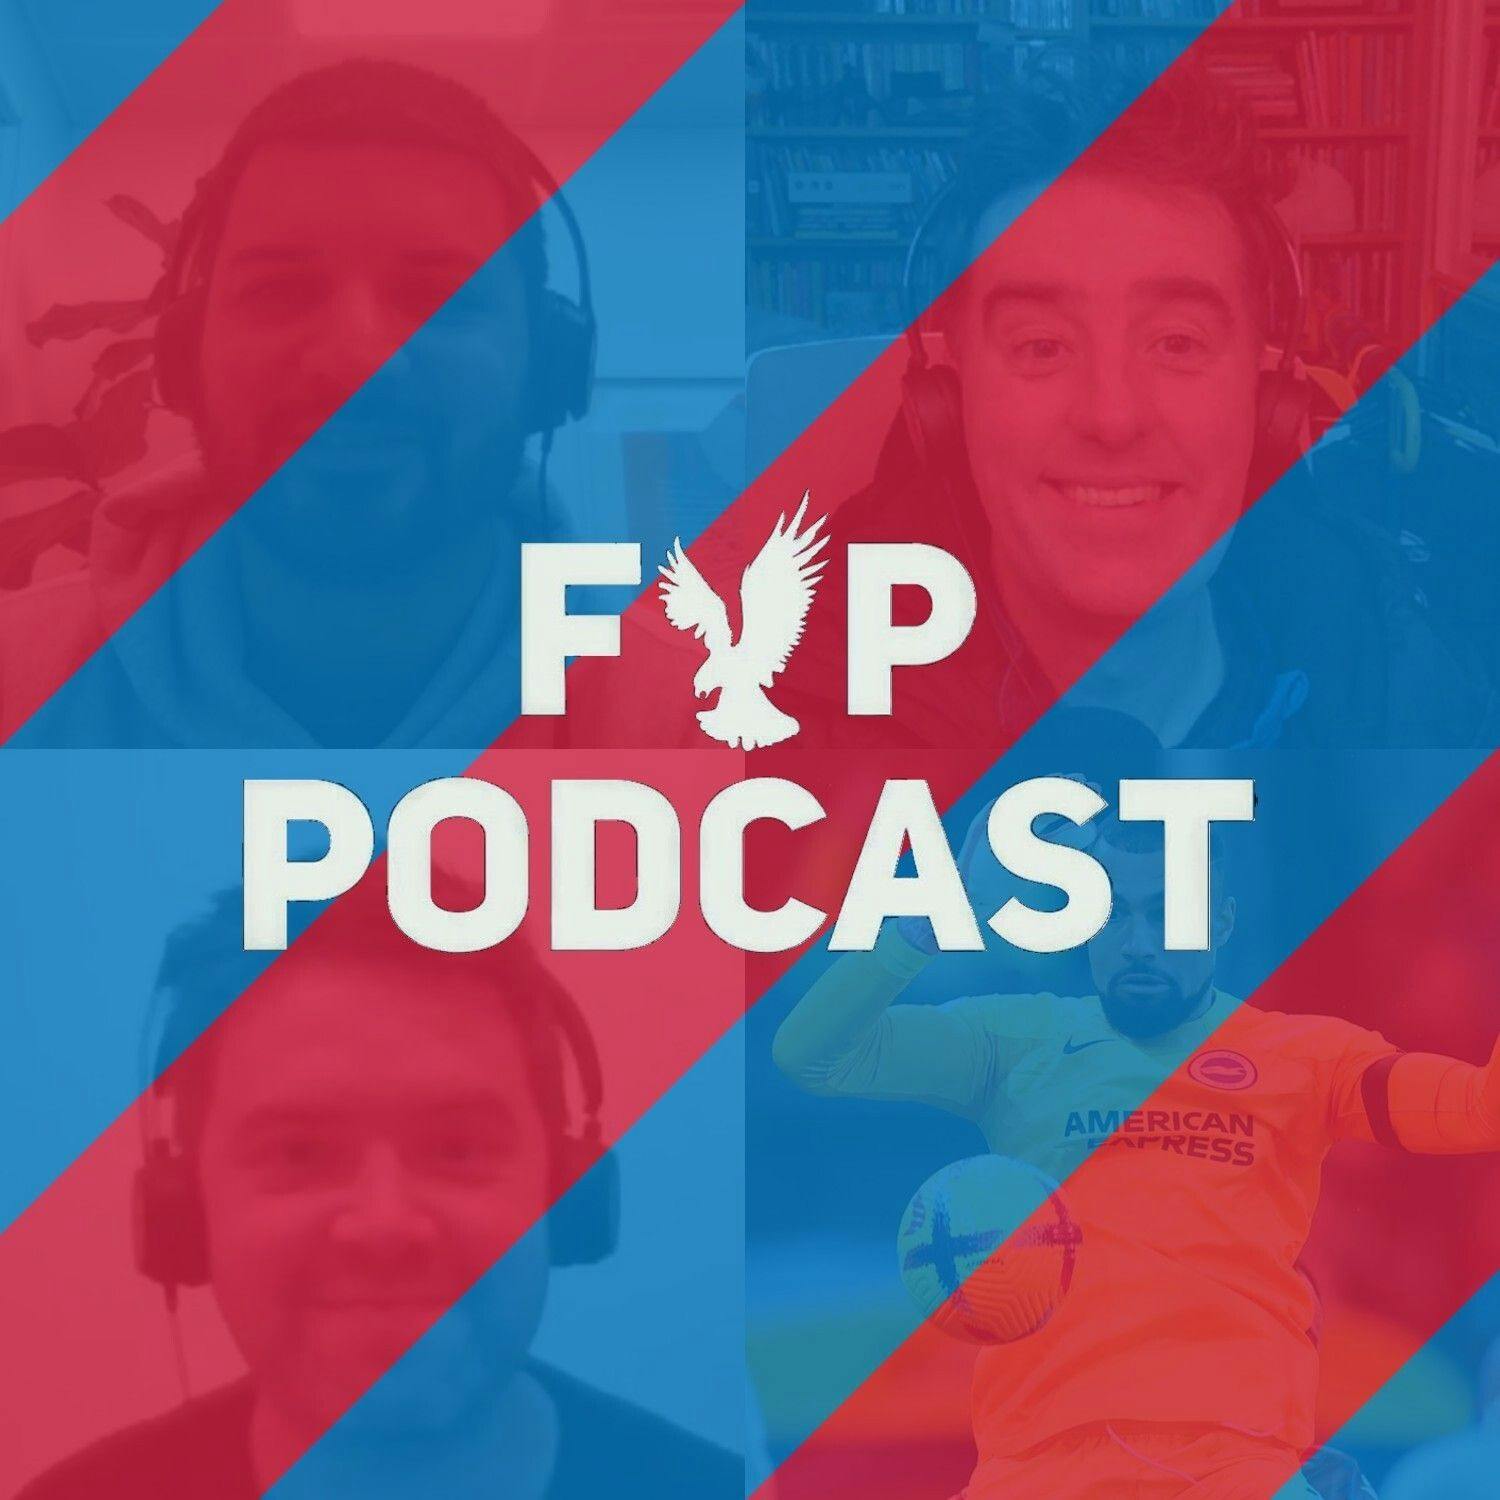 FYP Podcast 461 | Don't Let It Bounce